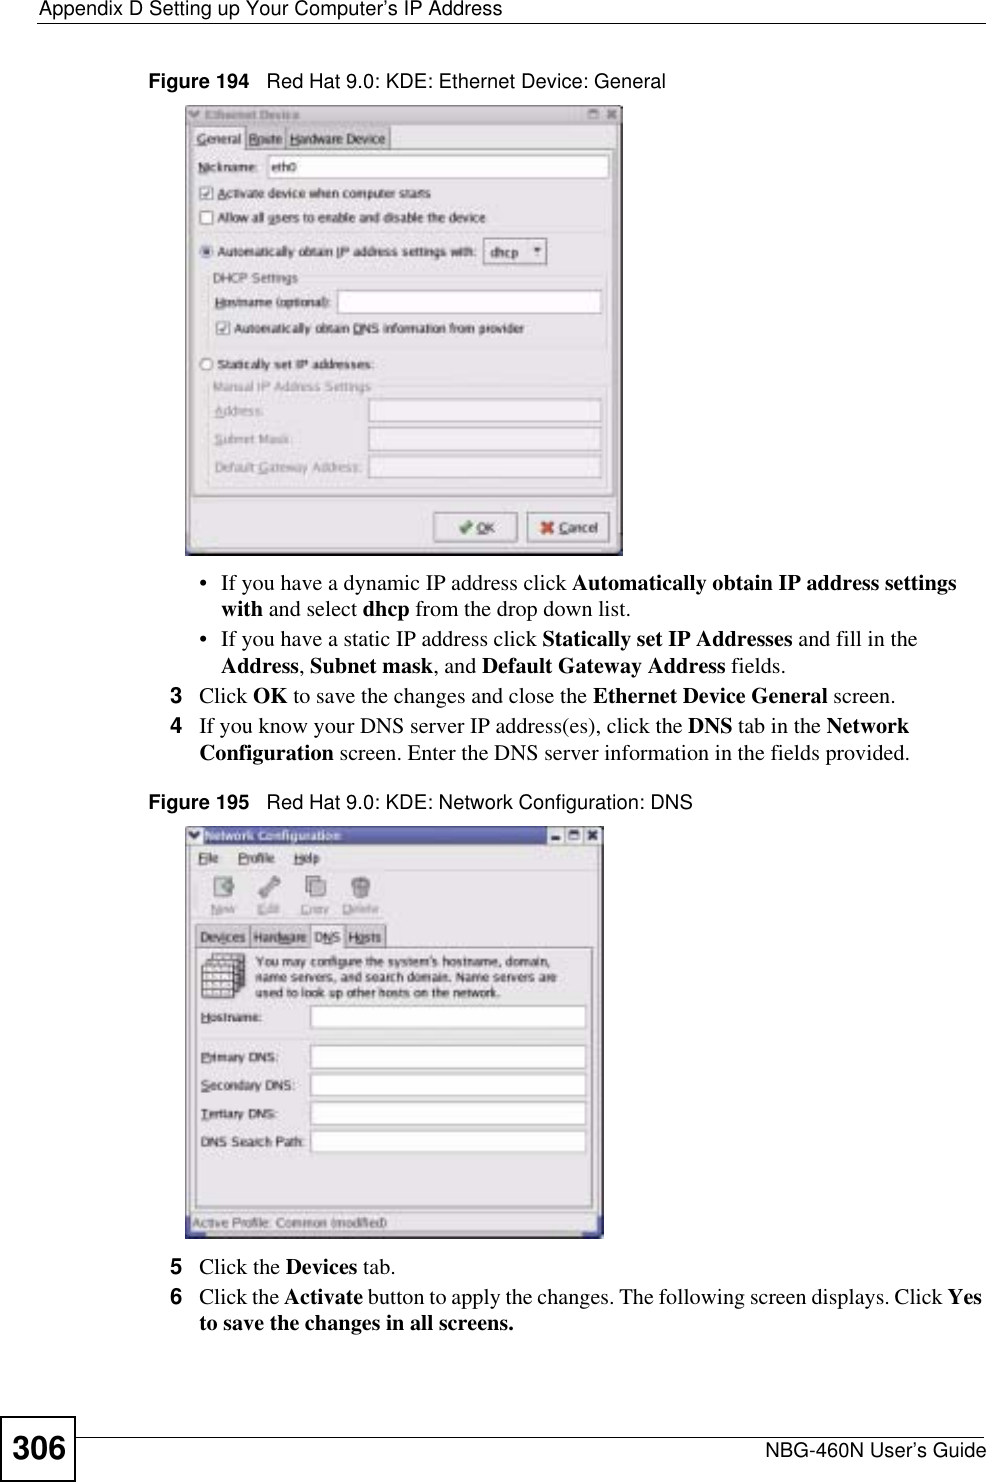 Appendix D Setting up Your Computer’s IP AddressNBG-460N User’s Guide306Figure 194   Red Hat 9.0: KDE: Ethernet Device: General • If you have a dynamic IP address click Automatically obtain IP address settings with and select dhcp from the drop down list. • If you have a static IP address click Statically set IP Addresses and fill in the Address,Subnet mask, and Default Gateway Address fields. 3Click OK to save the changes and close the Ethernet Device General screen. 4If you know your DNS server IP address(es), click the DNS tab in the NetworkConfiguration screen. Enter the DNS server information in the fields provided. Figure 195   Red Hat 9.0: KDE: Network Configuration: DNS 5Click the Devices tab. 6Click the Activate button to apply the changes. The following screen displays. Click Yes to save the changes in all screens.